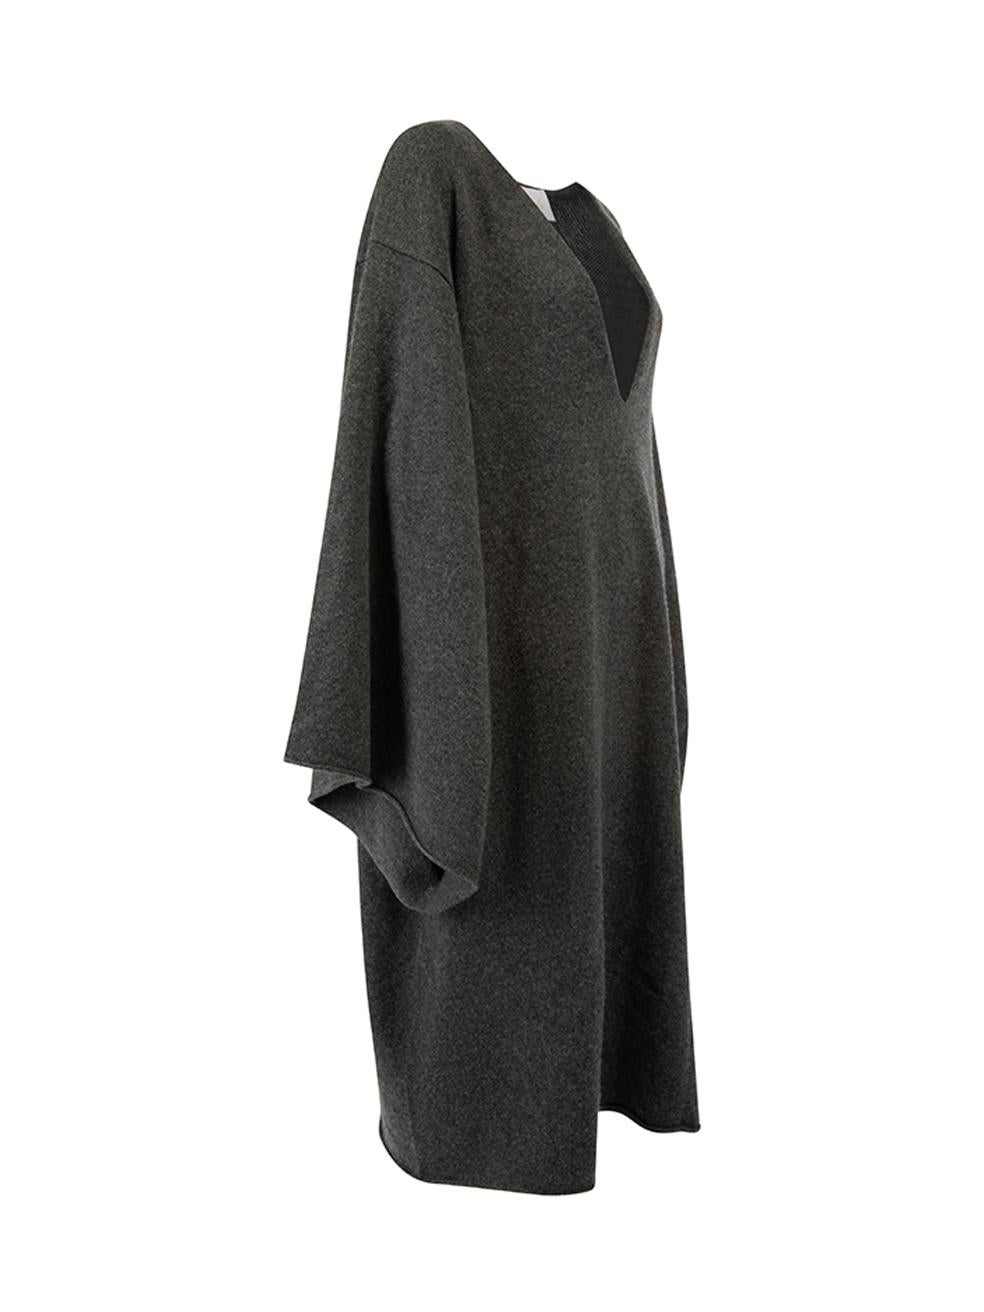 CONDITION is Very good. Hardly any visible wear to dress is evident on this used Chloé designer resale item. Details Grey Cashmere Sweater dress Oversized Knee length V neckline Made in China Composition 100% Cashmere Care instructions: Professional